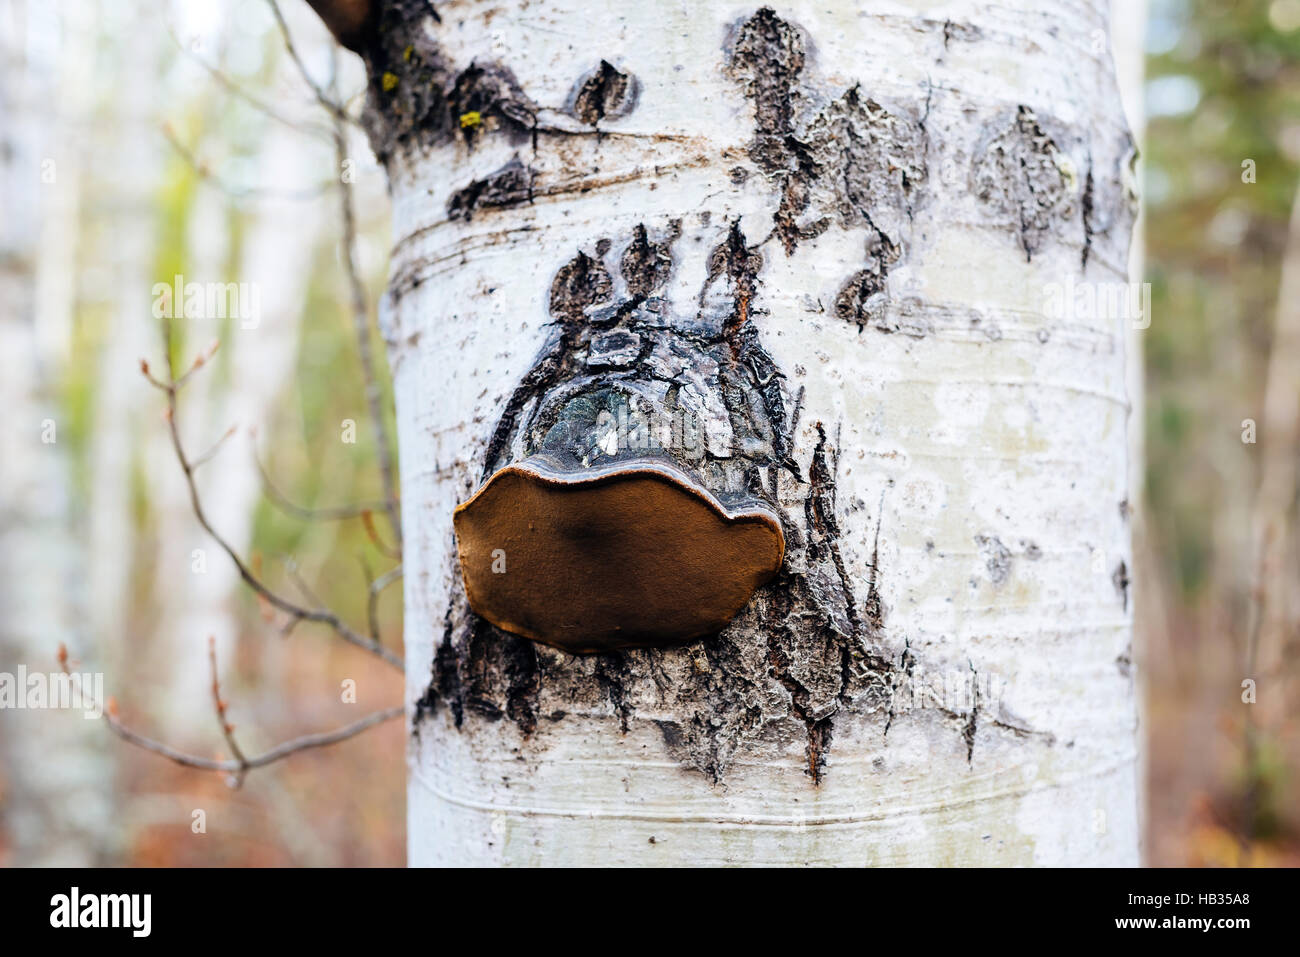 A polypore mushroom growing on a birch tree near Clearwater, British Columbia, Canada Stock Photo